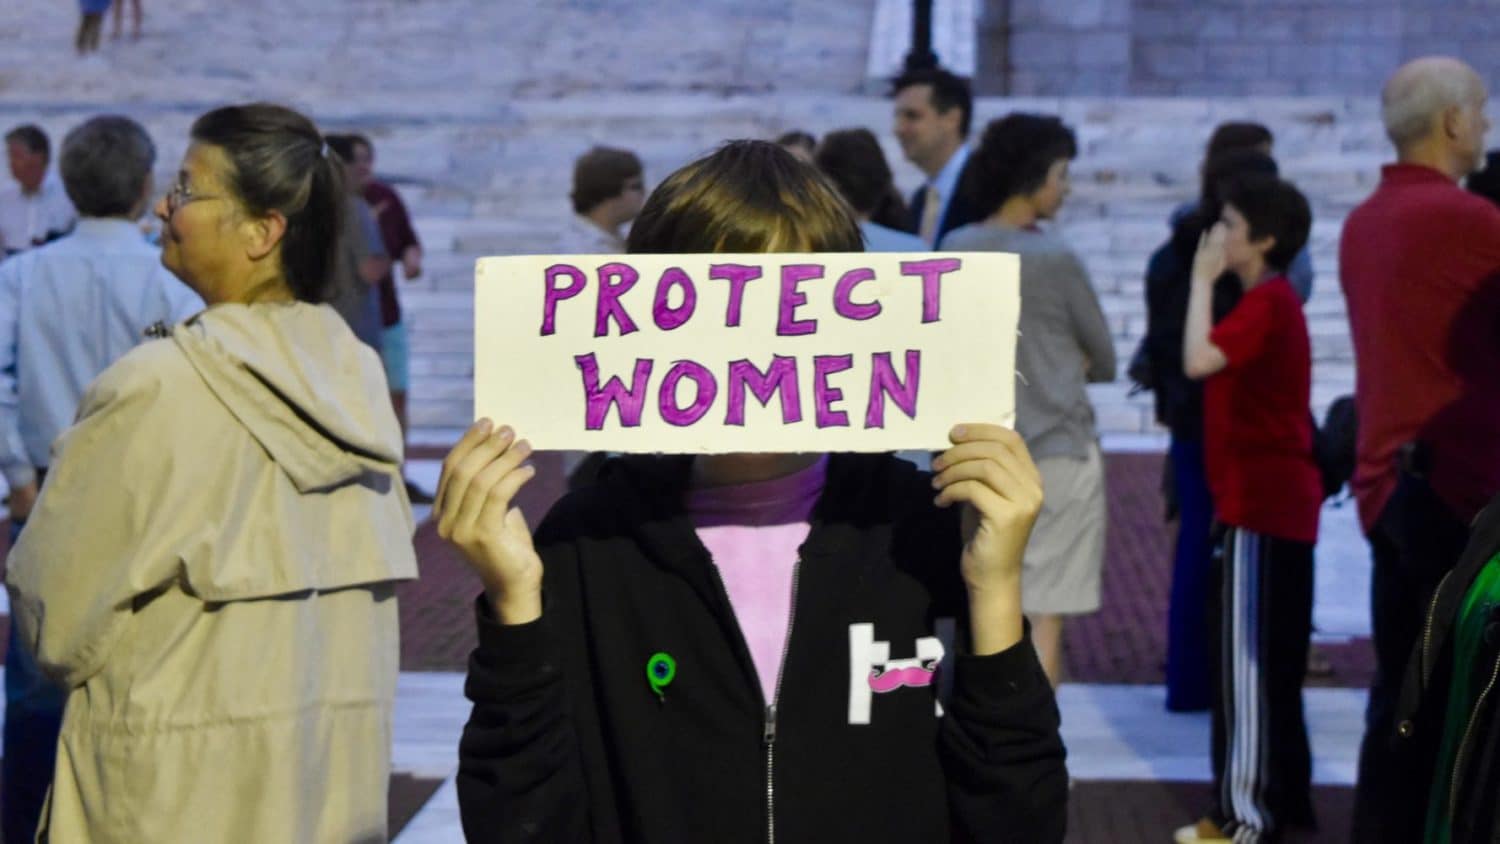 The Woman Project is working to protect your health care